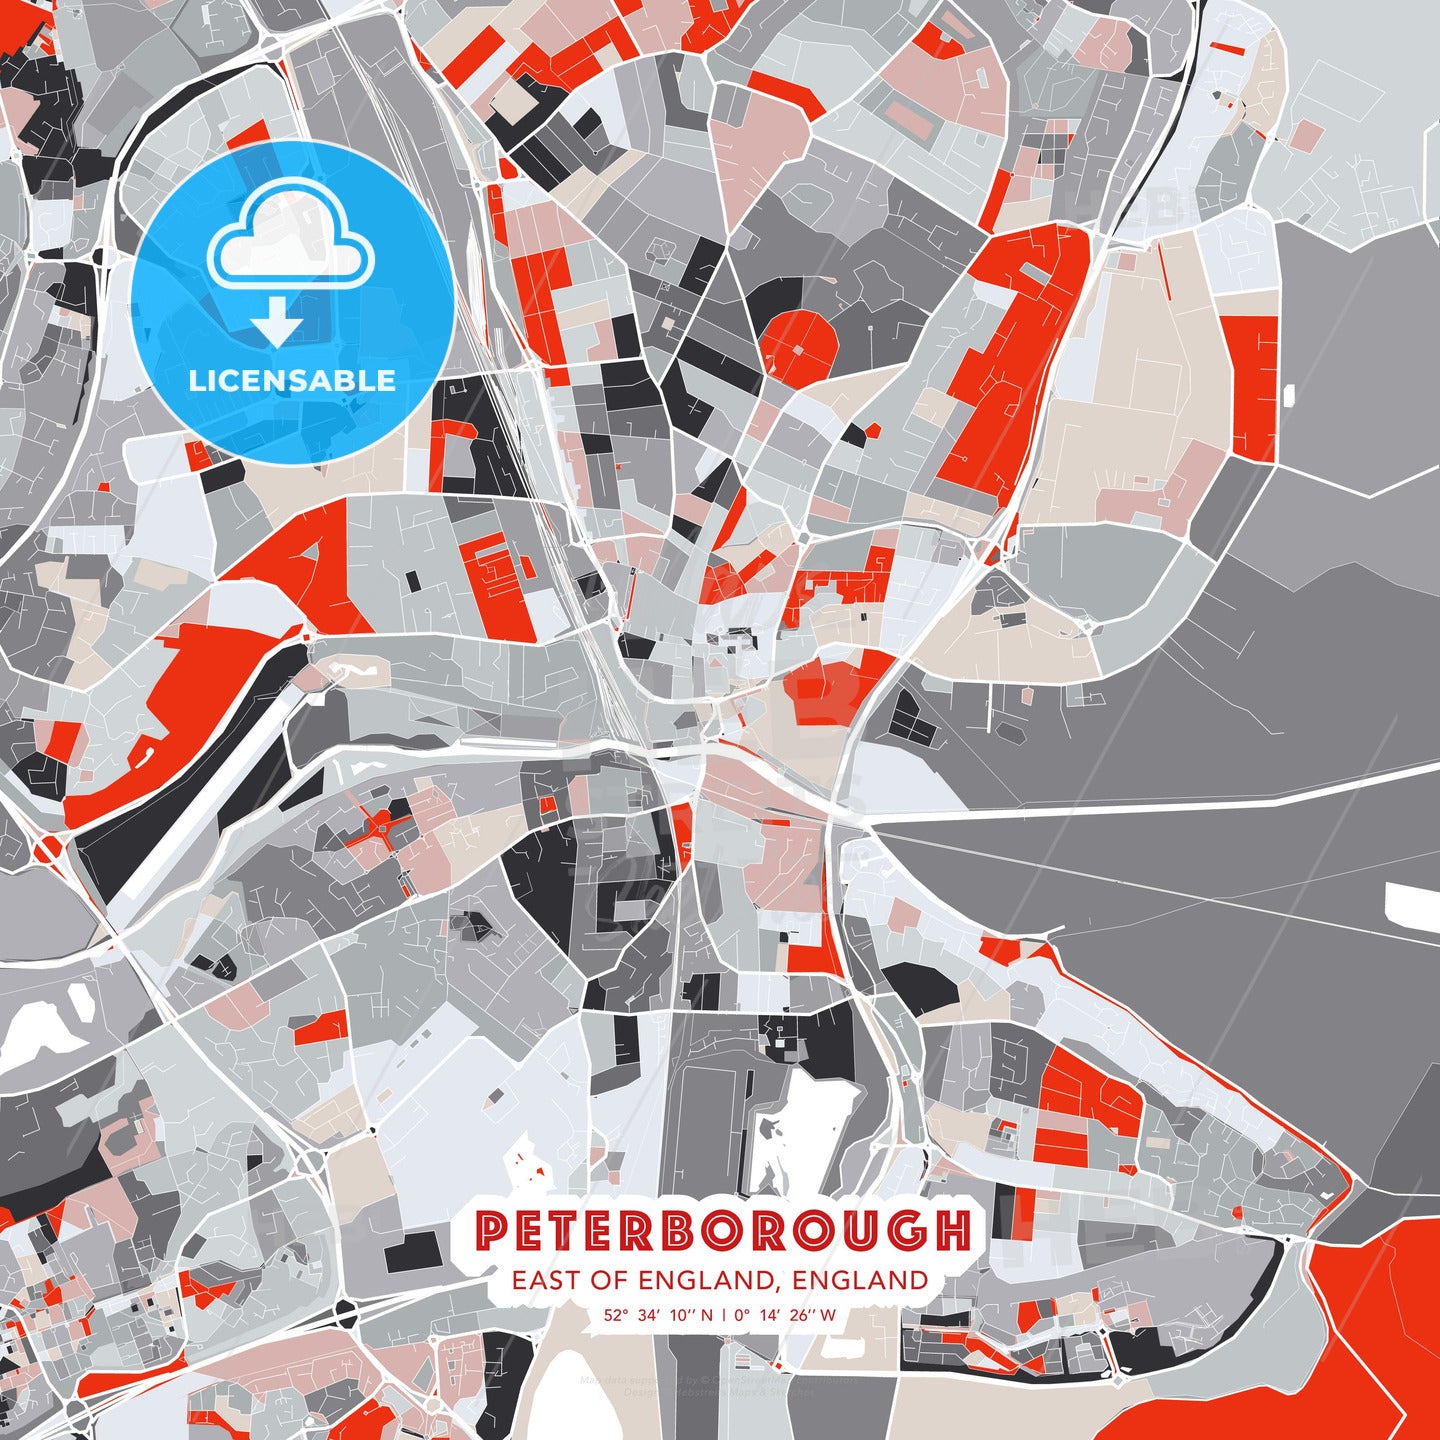 Peterborough, East of England, England, modern map - HEBSTREITS Sketches